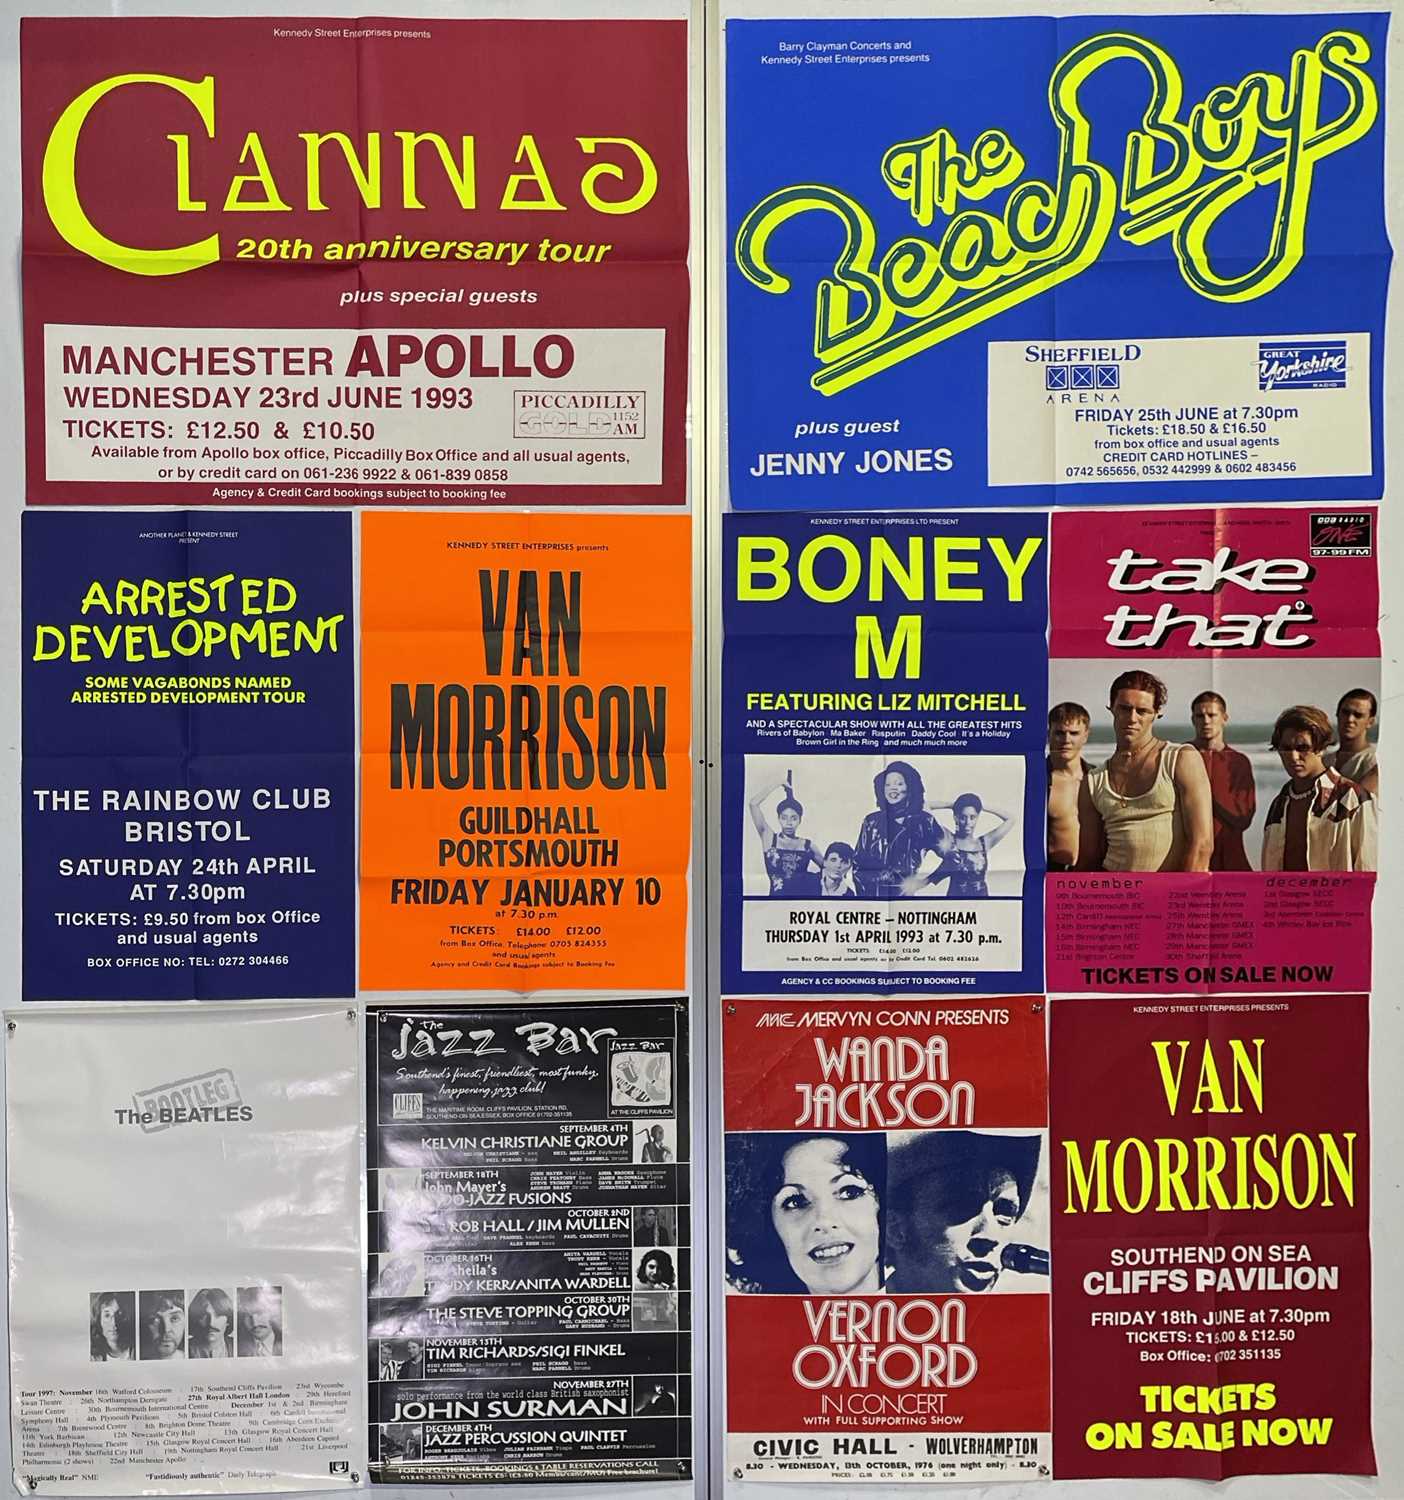 1980S/1990S CONCERT POSTERS